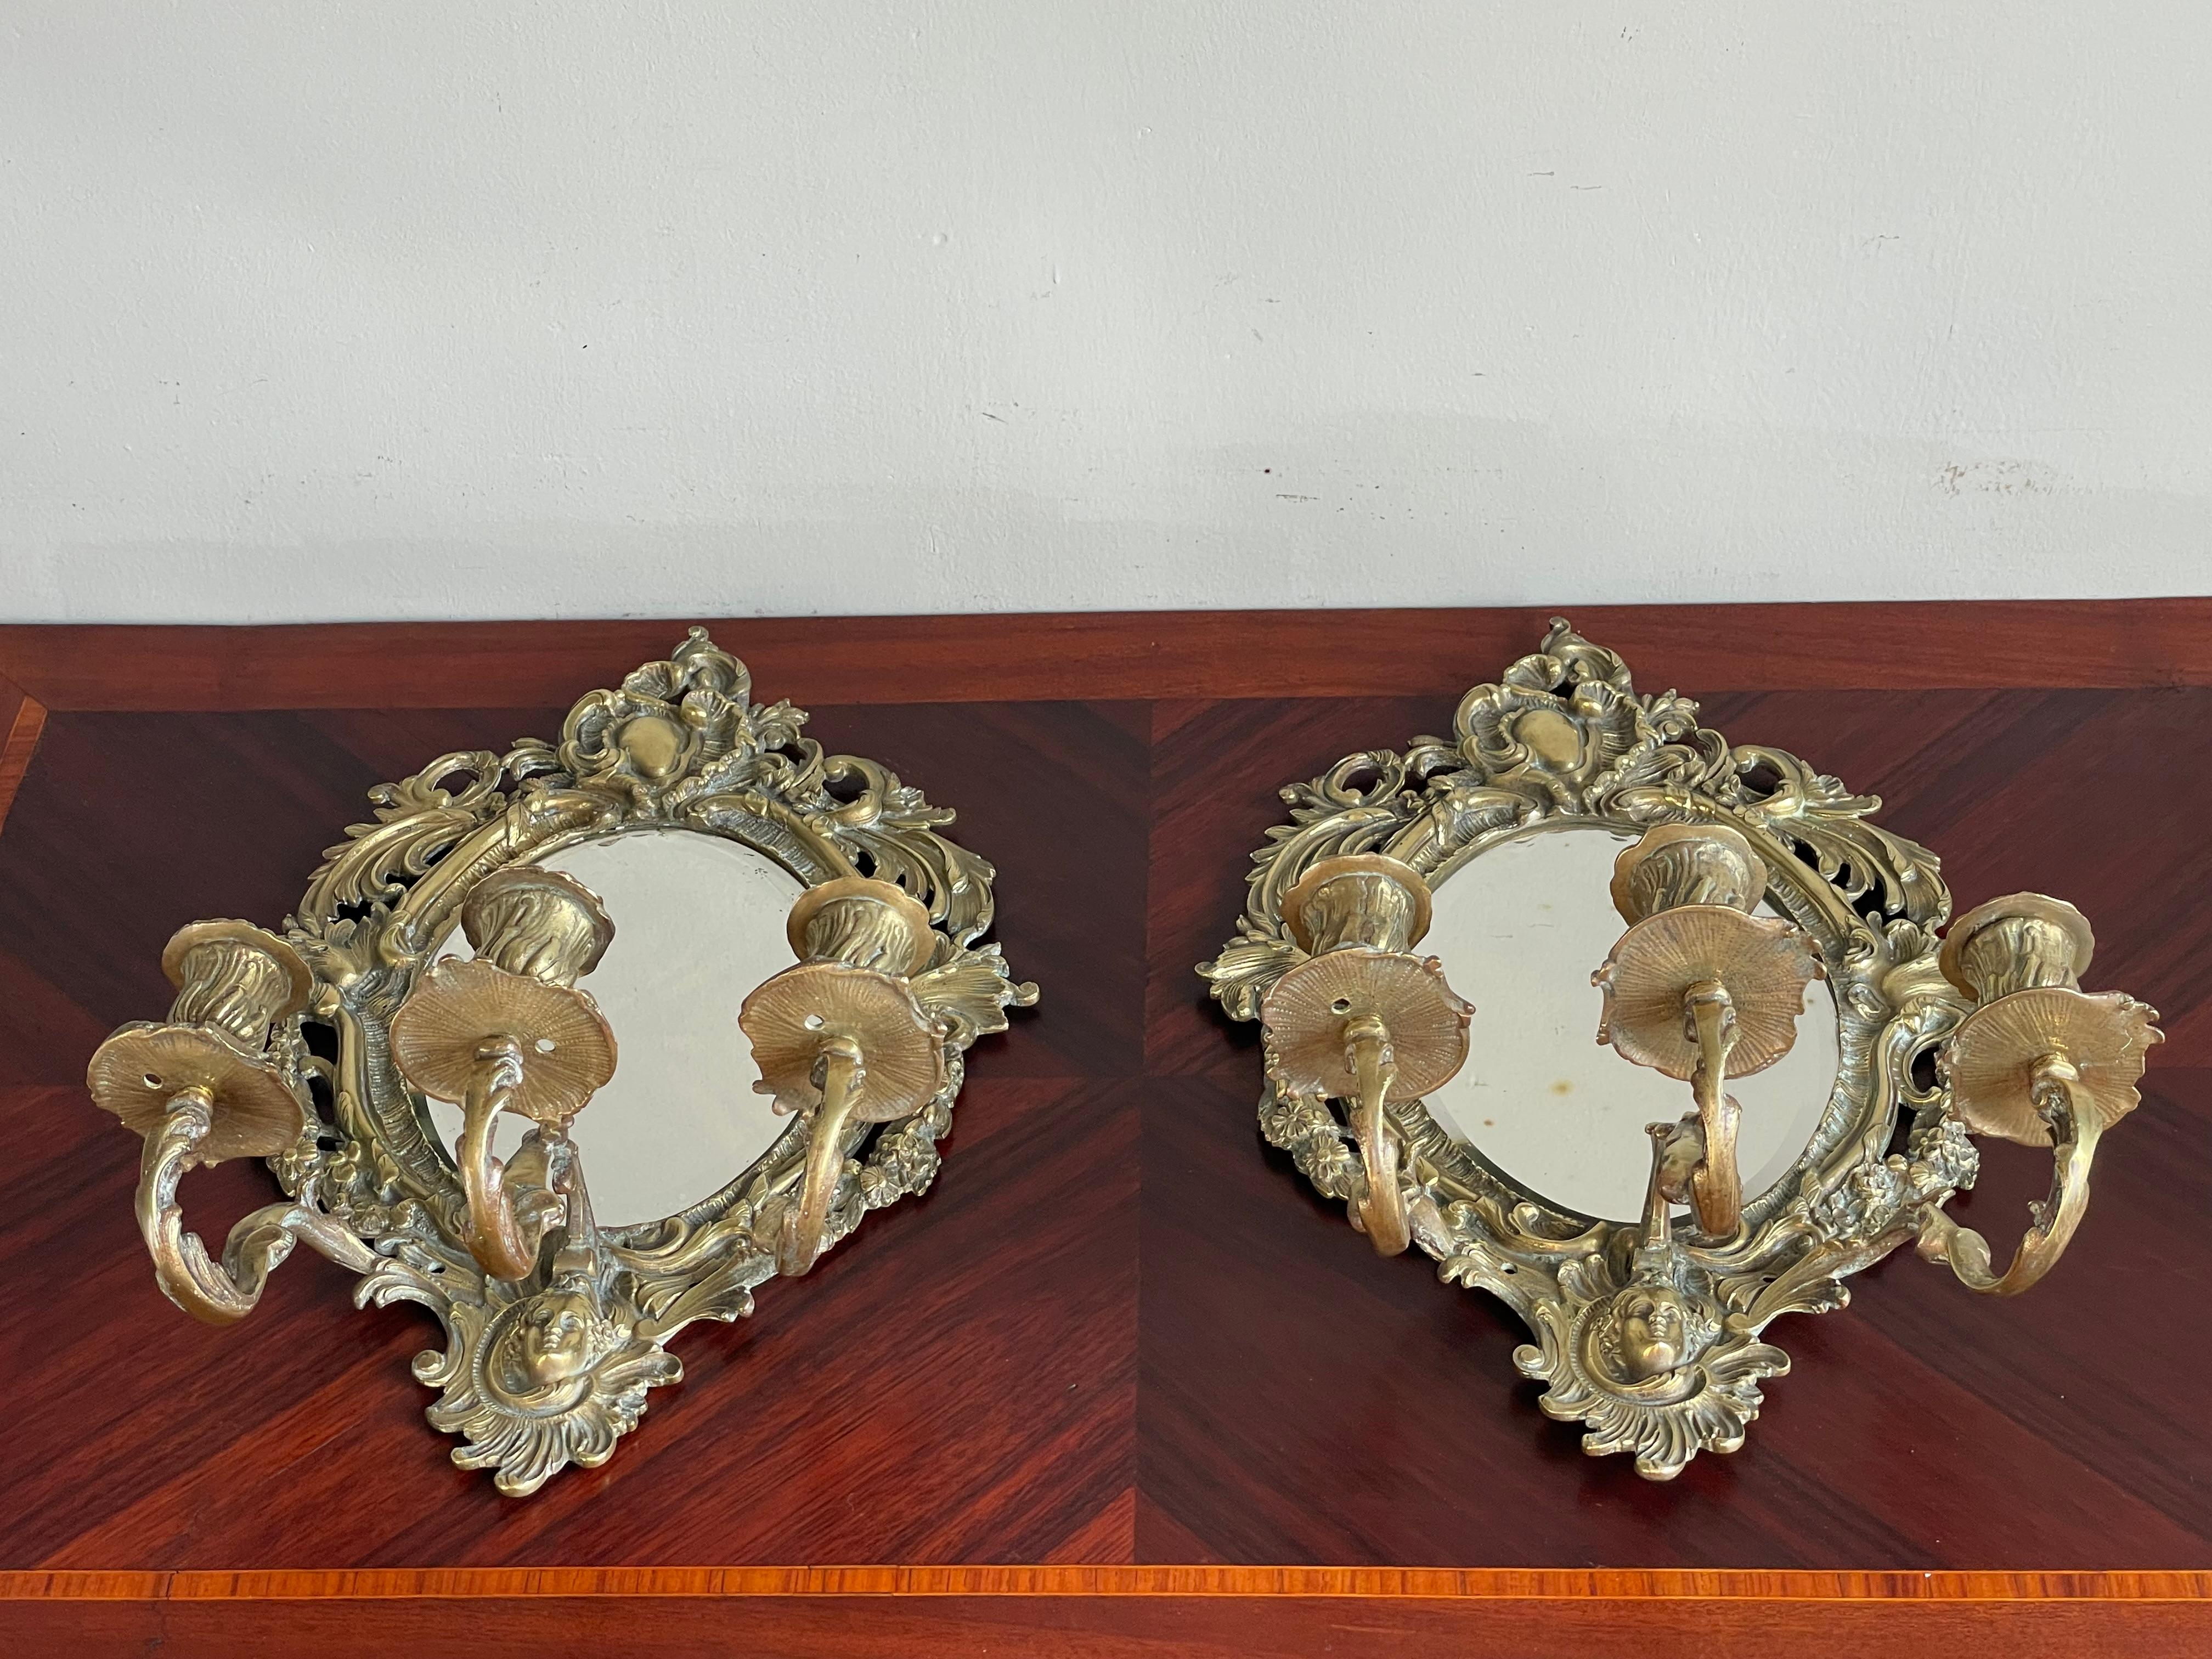 Antique Pair of Bronze Wall Sconce Candelabras w. Beveled Mirrors & Goddess Mask For Sale 5